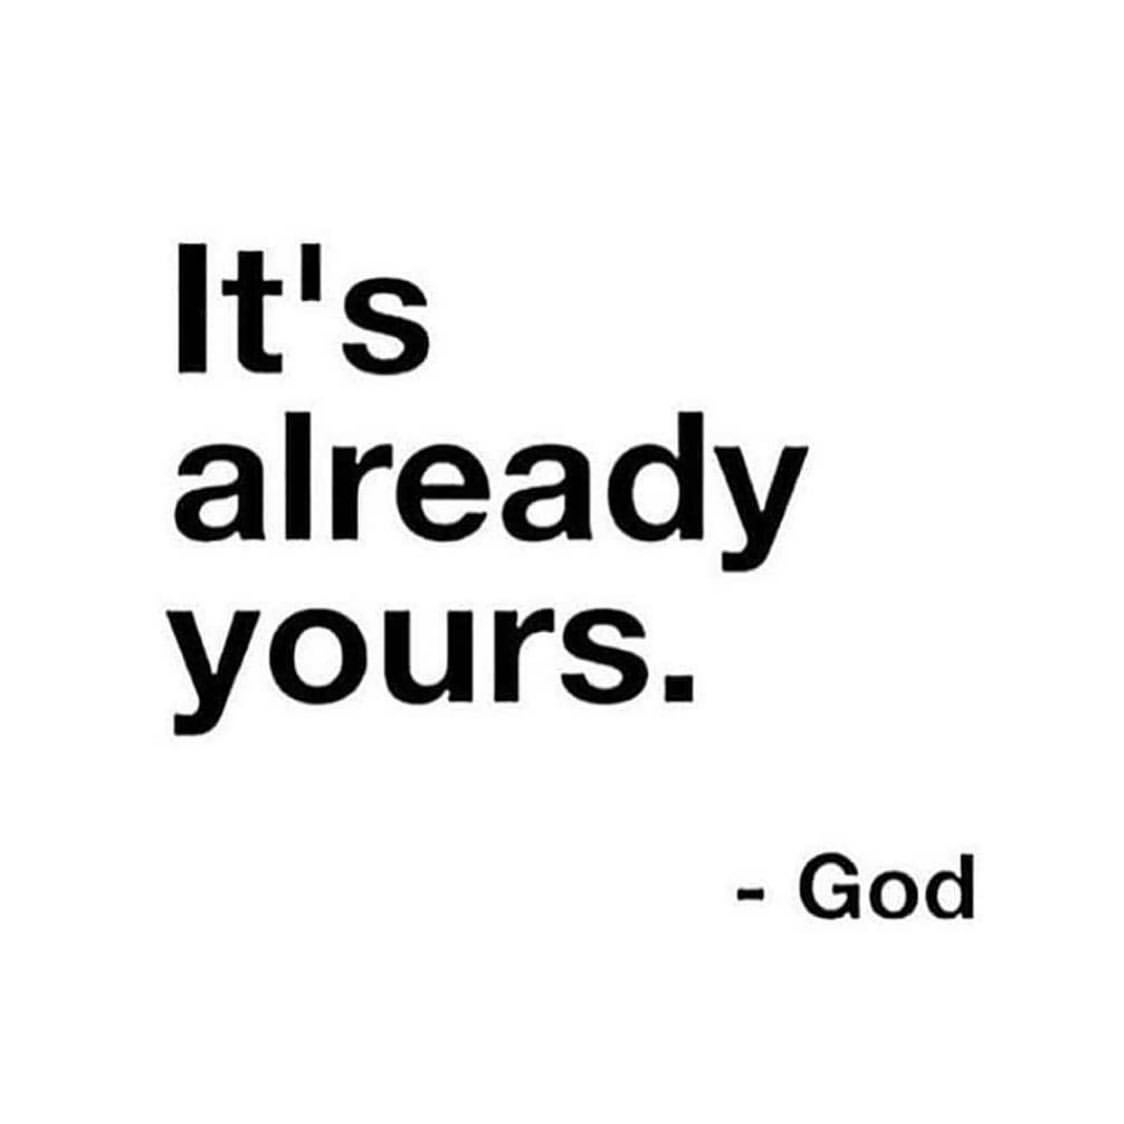 It's already yours. God.